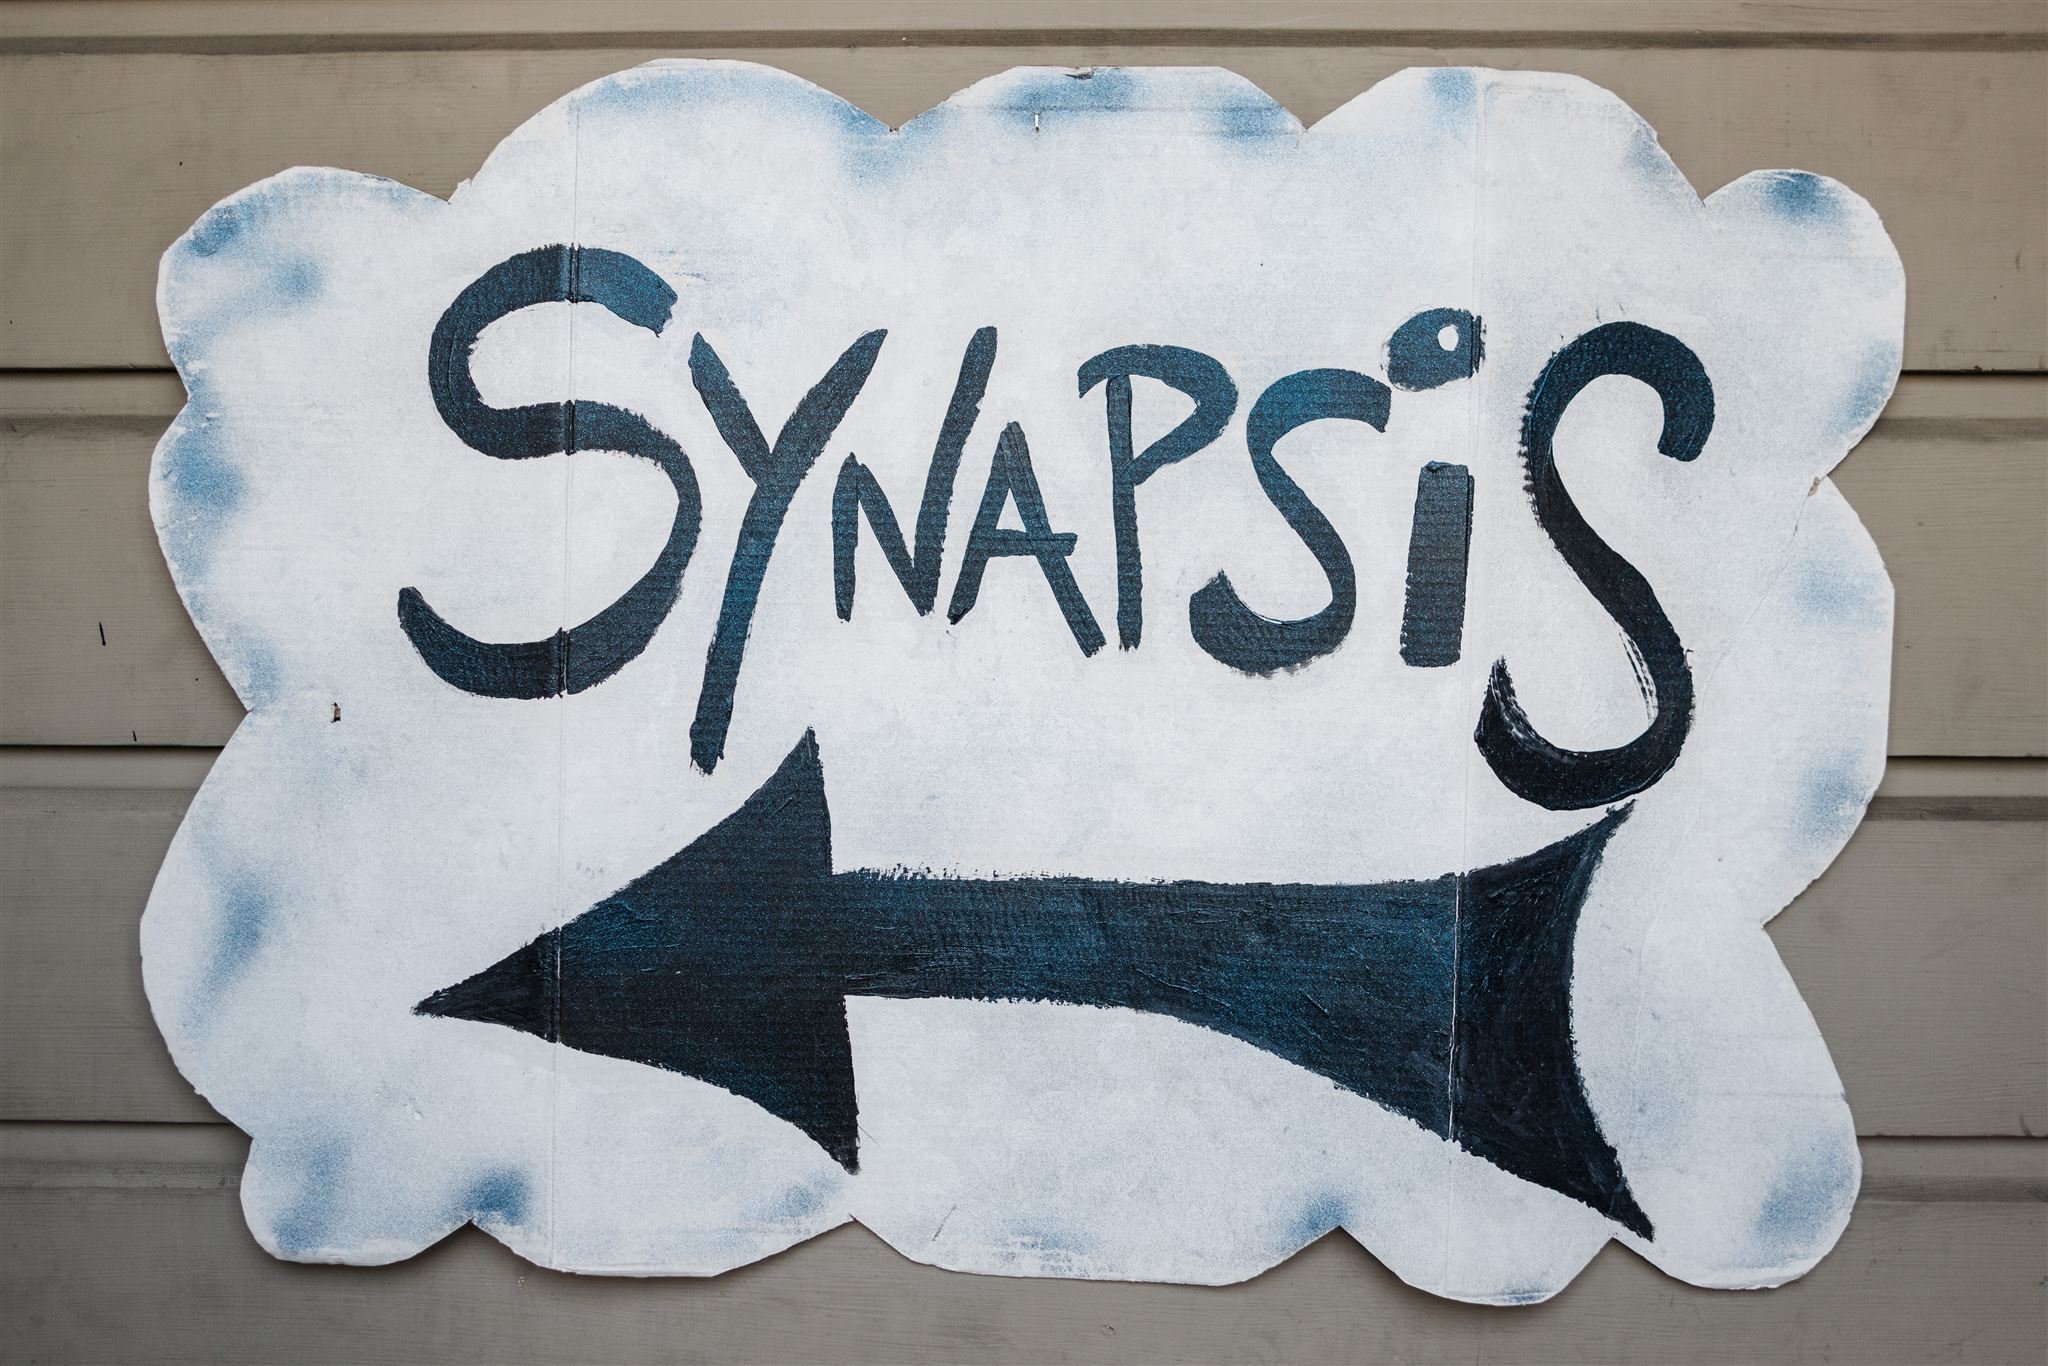 The original painted sign outside of Synapsis Union.